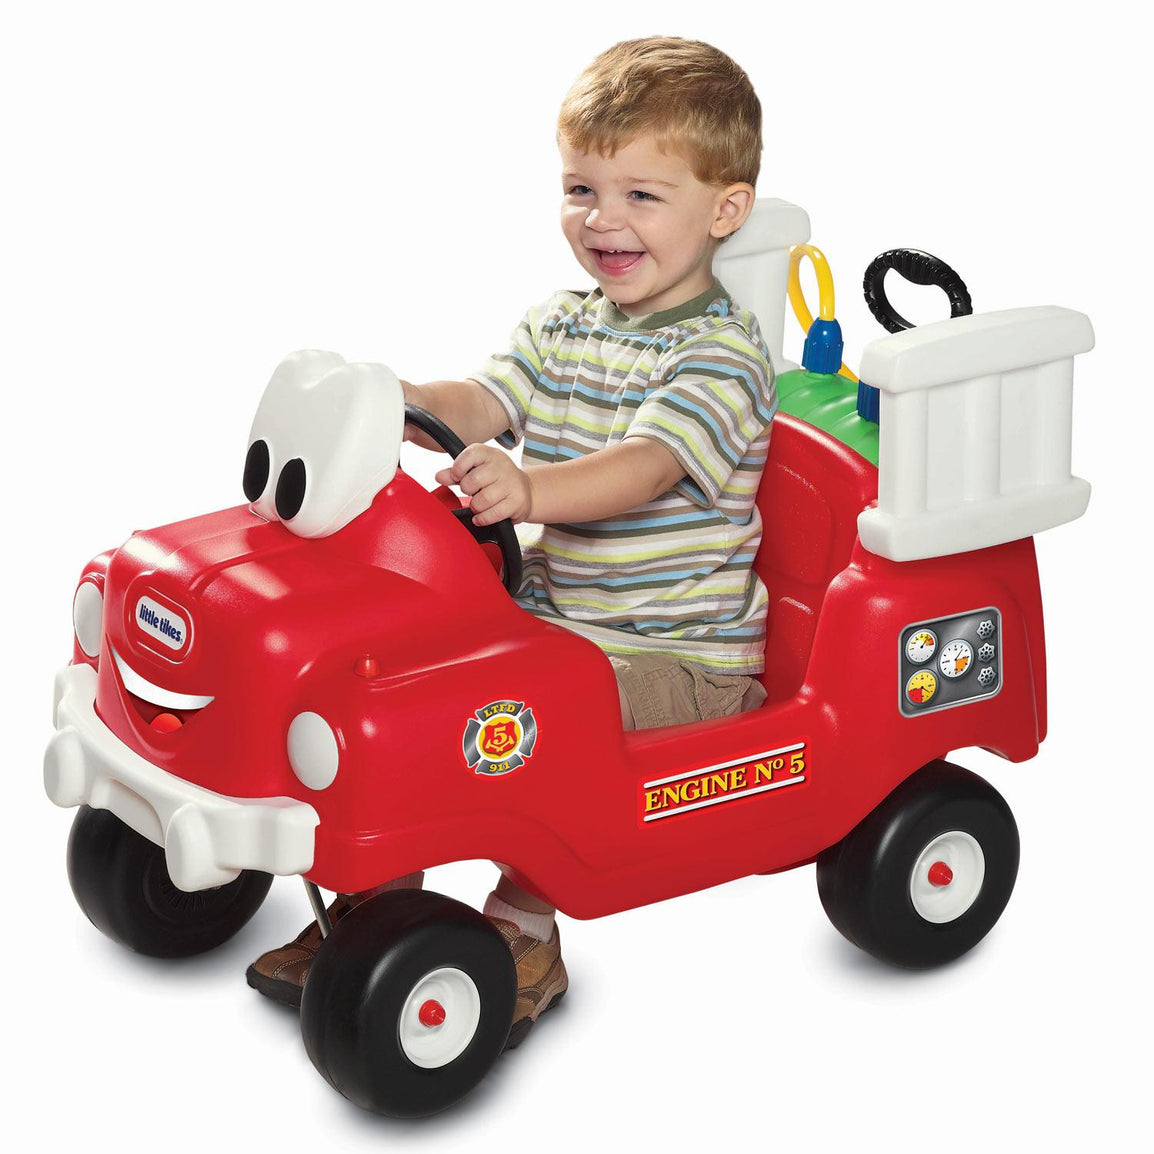 Spray & Rescue Fire Truck - Official Little Tikes Website